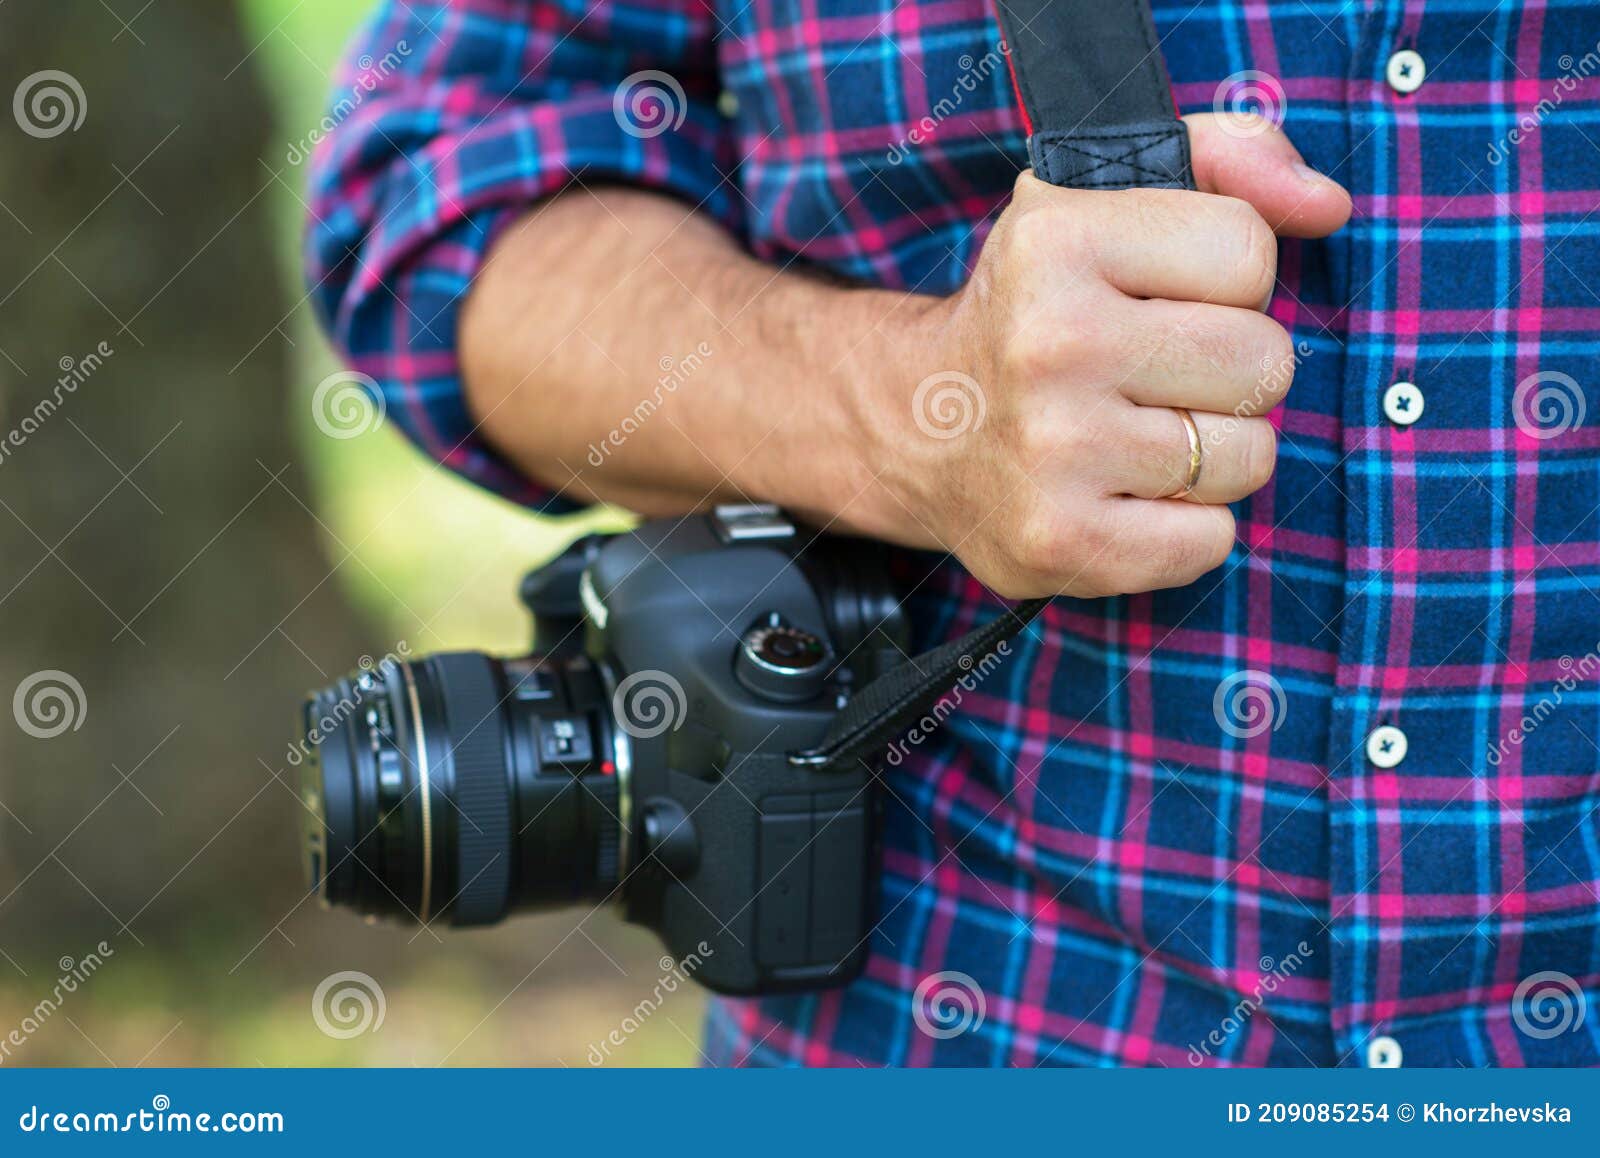 photographer or traveler concept. photographer holding digital camera in his hands